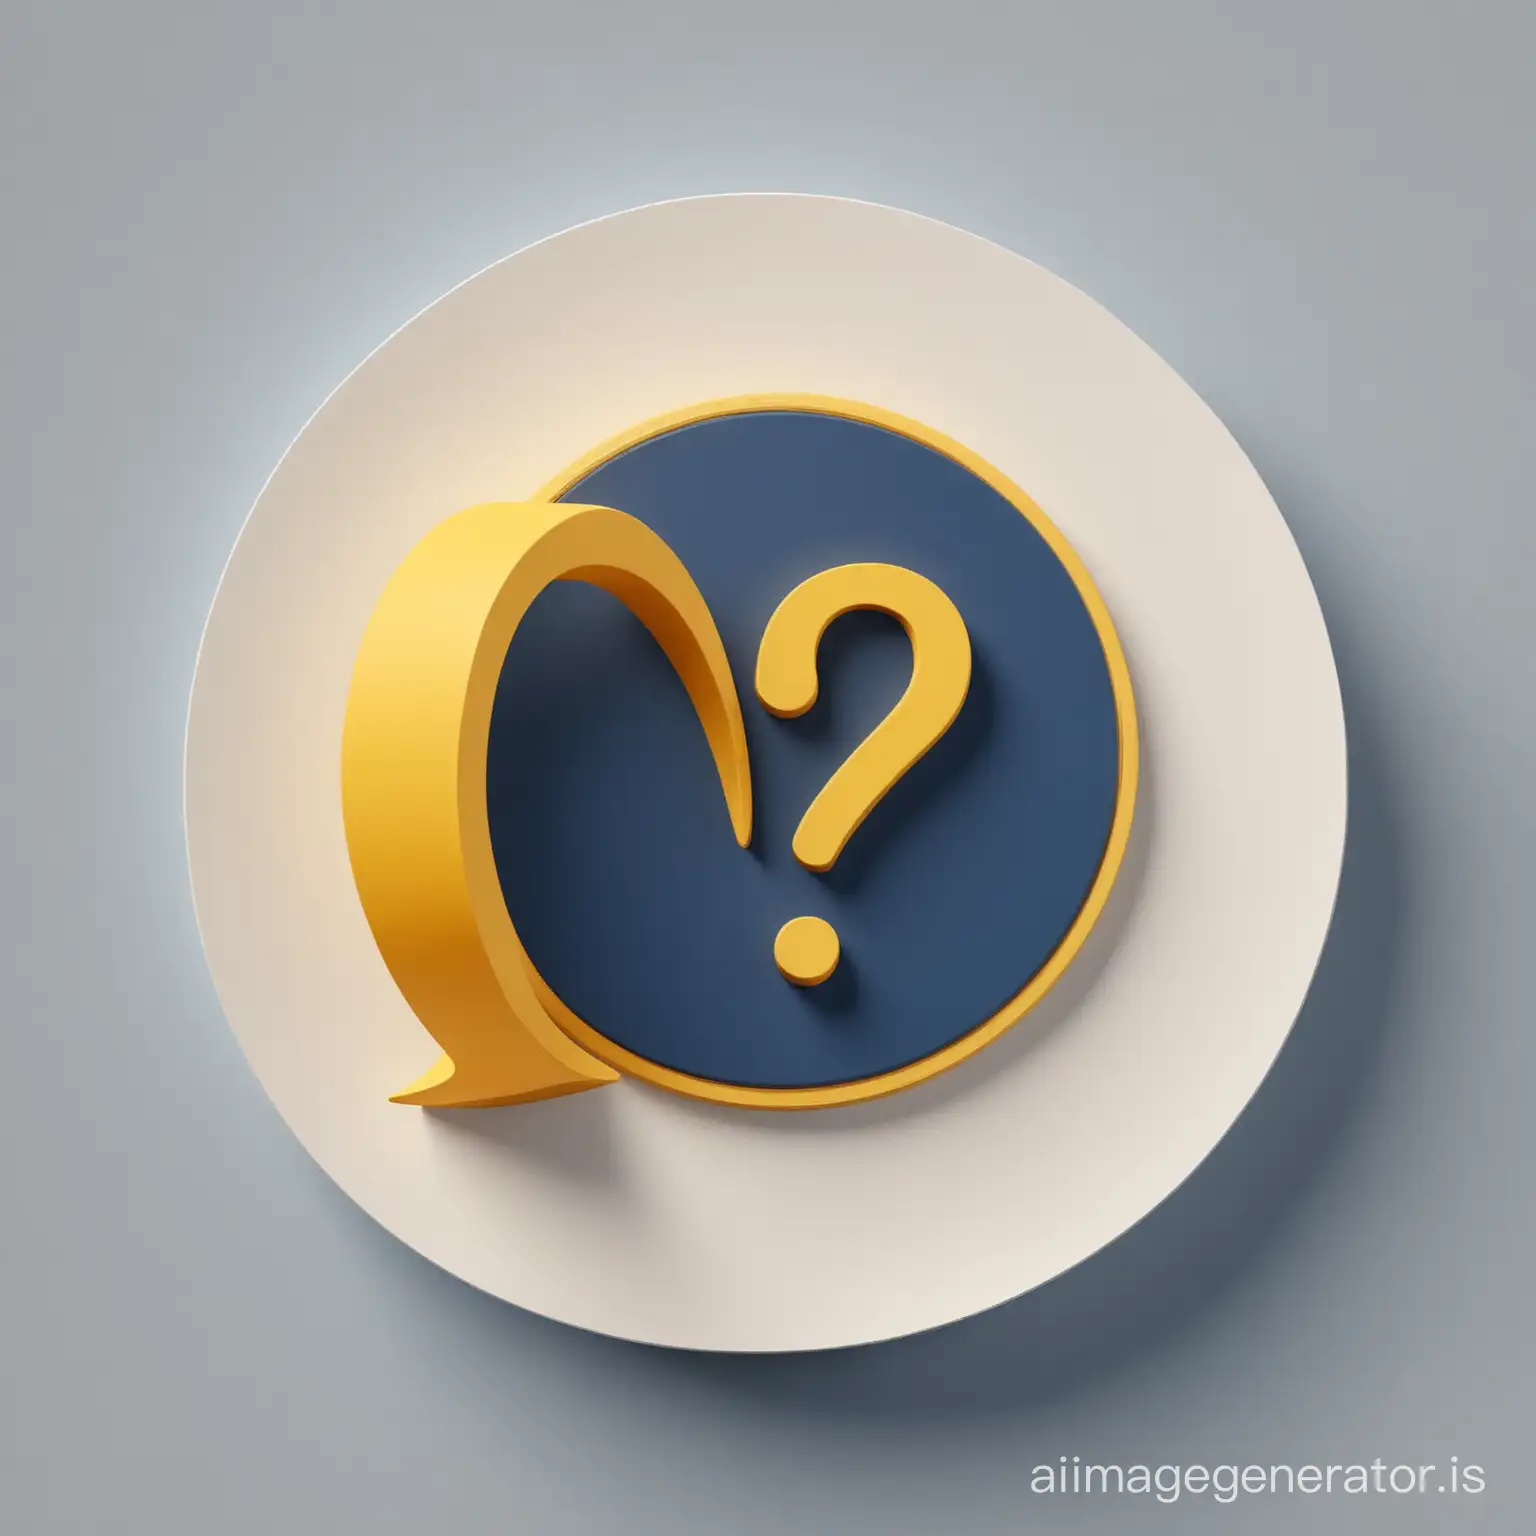 3D-Dark-Blue-Person-Profile-with-Yellow-Exclamation-Point-on-White-Circle-on-Brnanco-Background